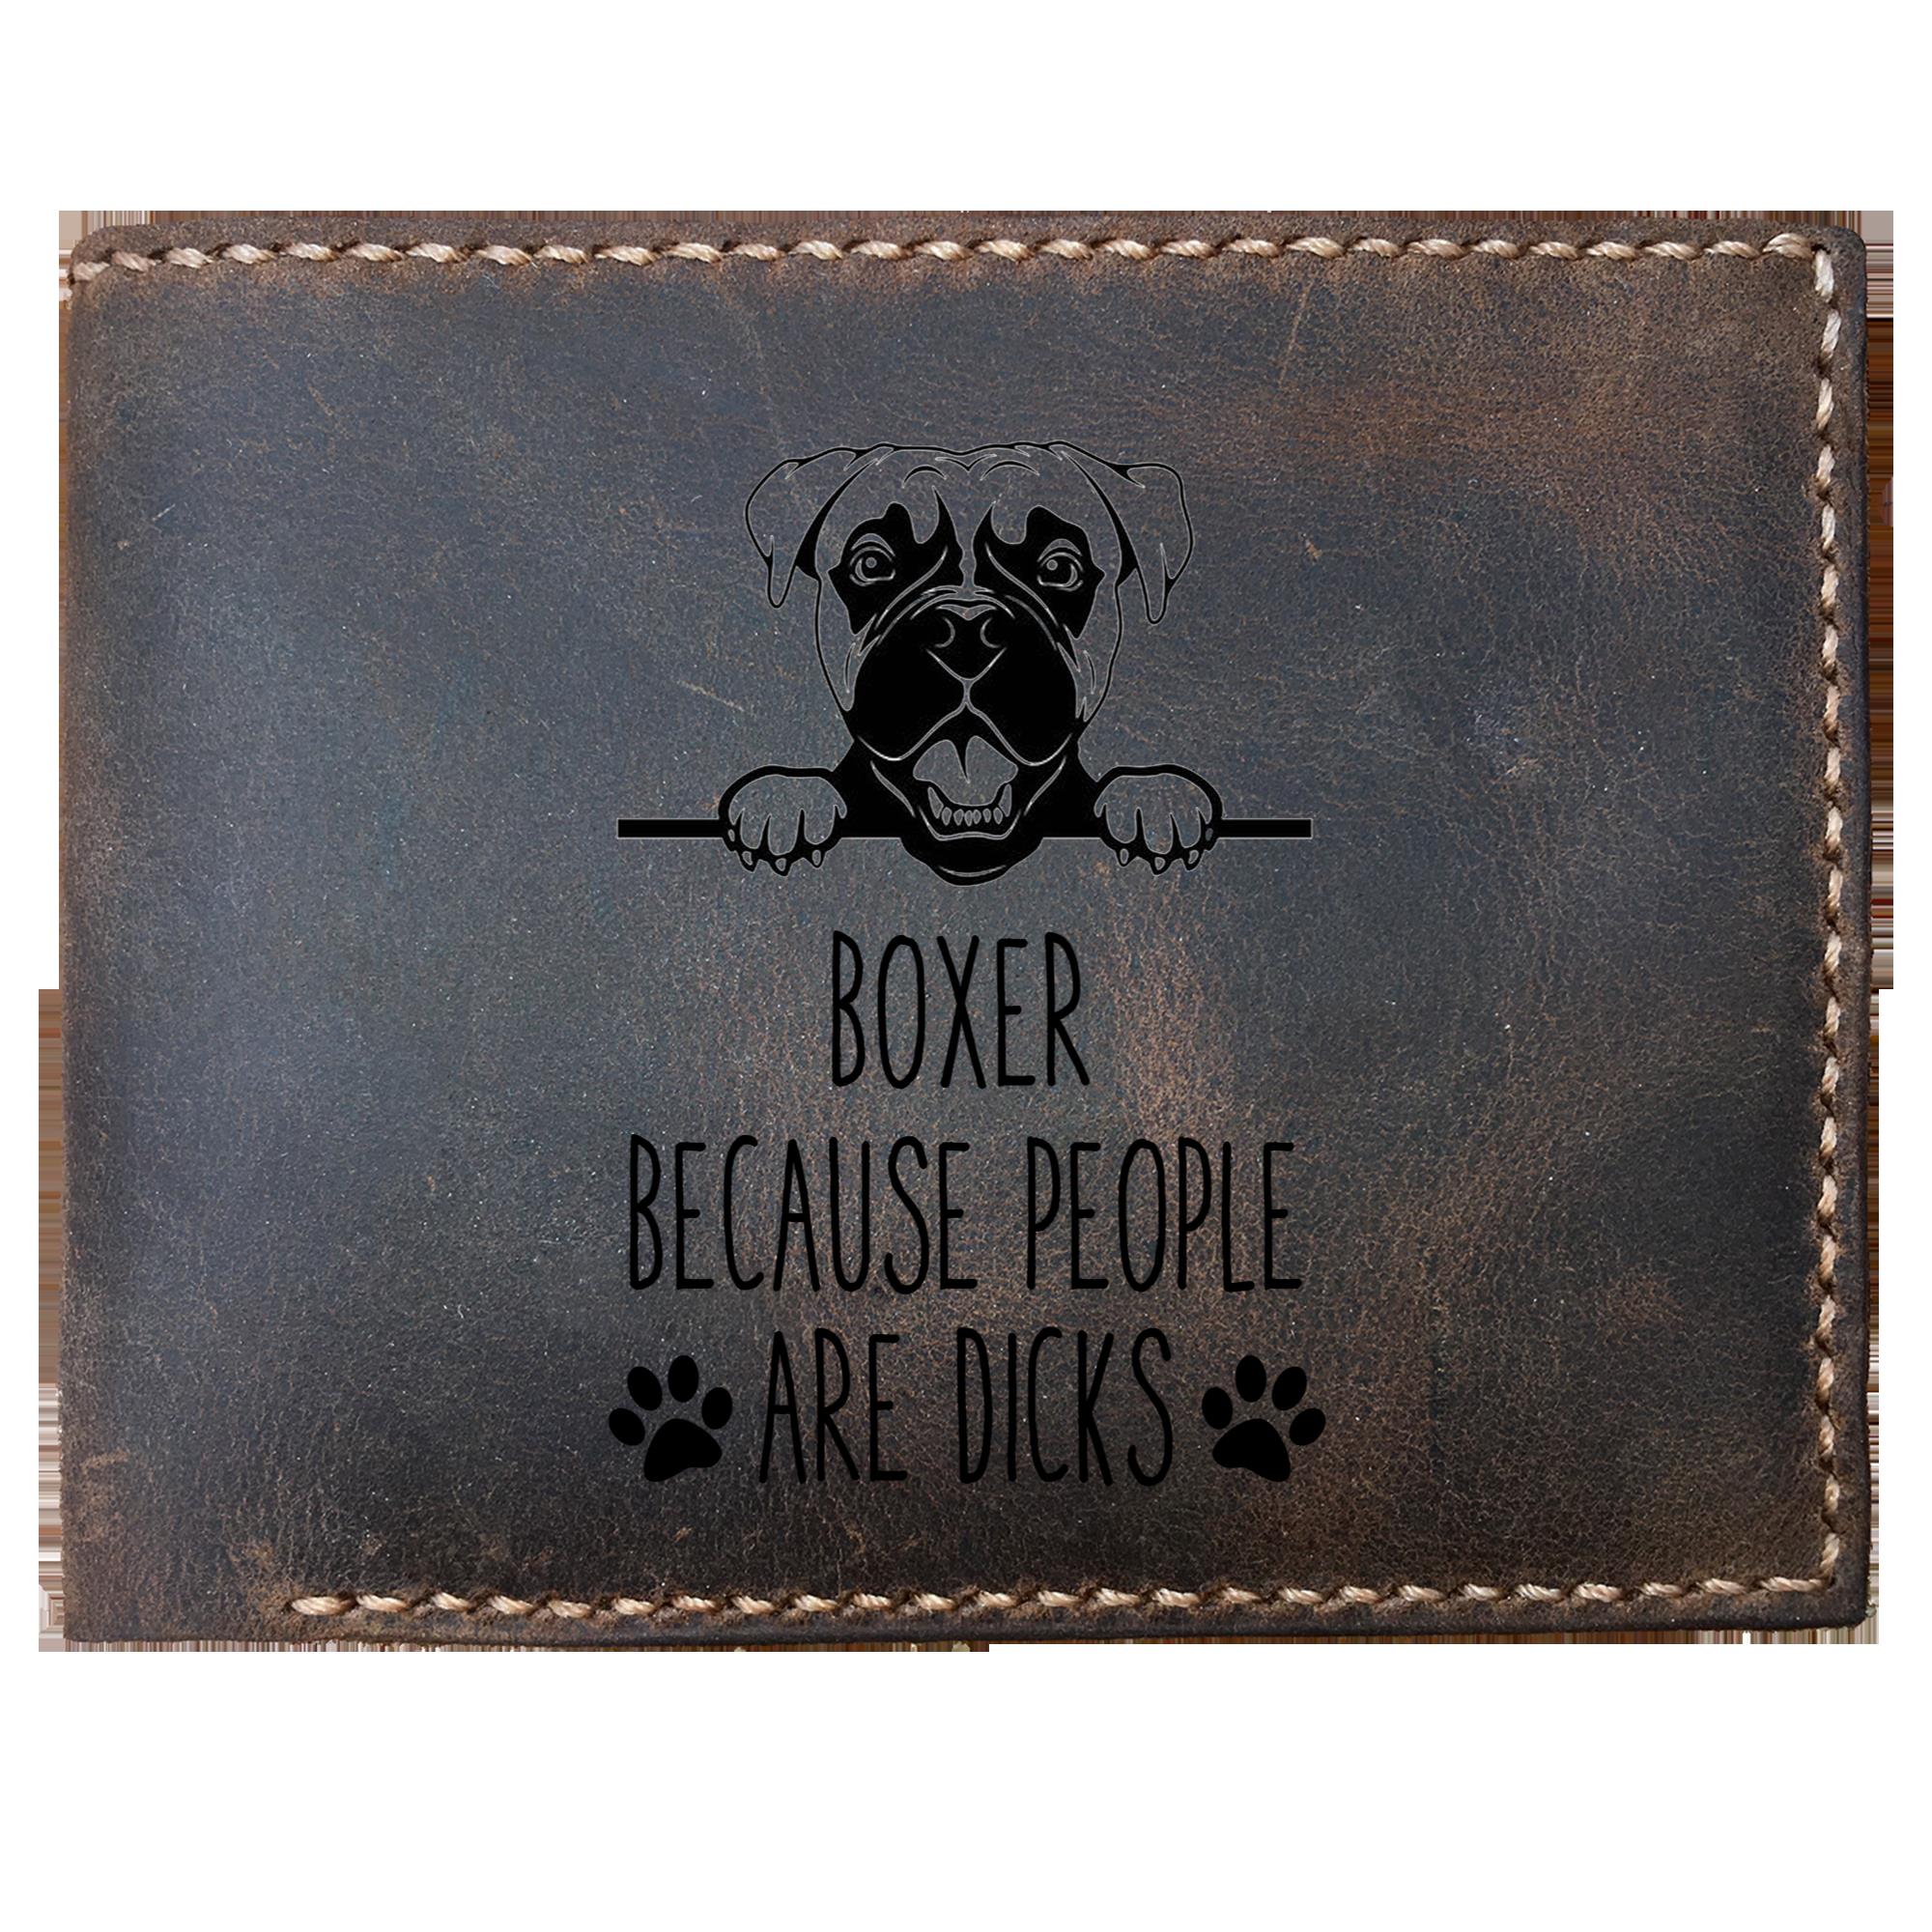 Funny Skitongifts Custom Laser Engraved Bifold Leather Wallet Vintage Boxer Because People Are Dicks